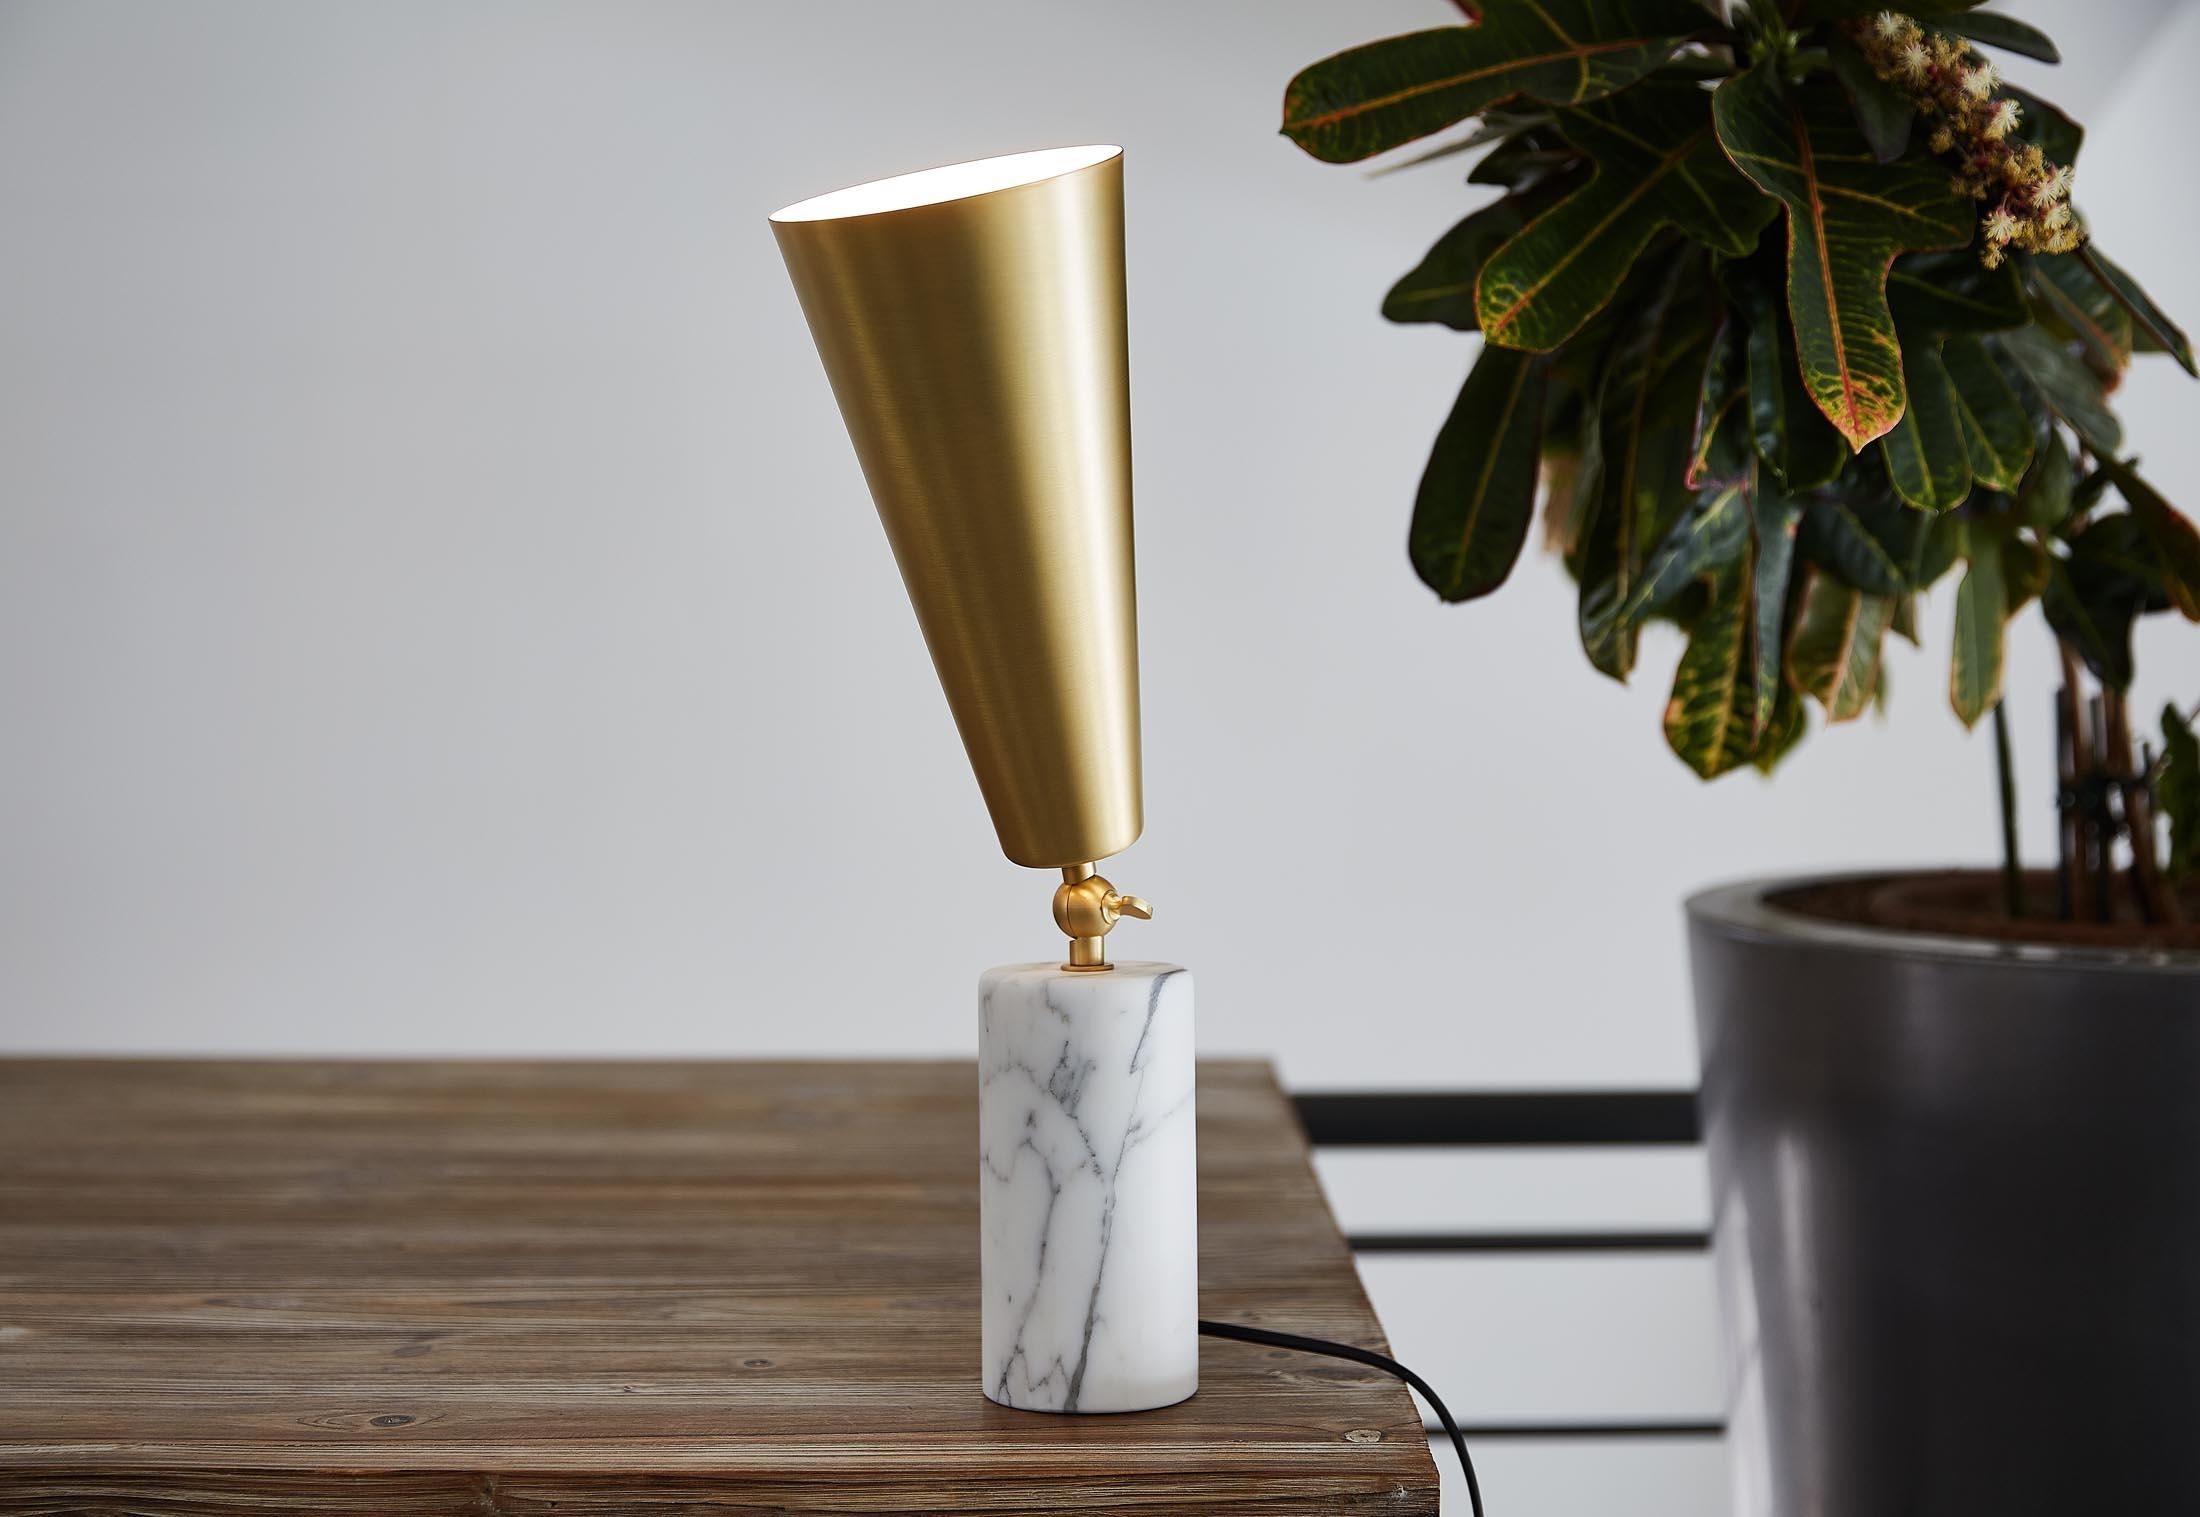 Tato Italia 'Vox' Table Lamp in White Carrara Marble and Satin Brass. Designed by Lorenza Bozzoli in 2016.

Price is per item. Available to order in unlimited quantities. Available in 15.7